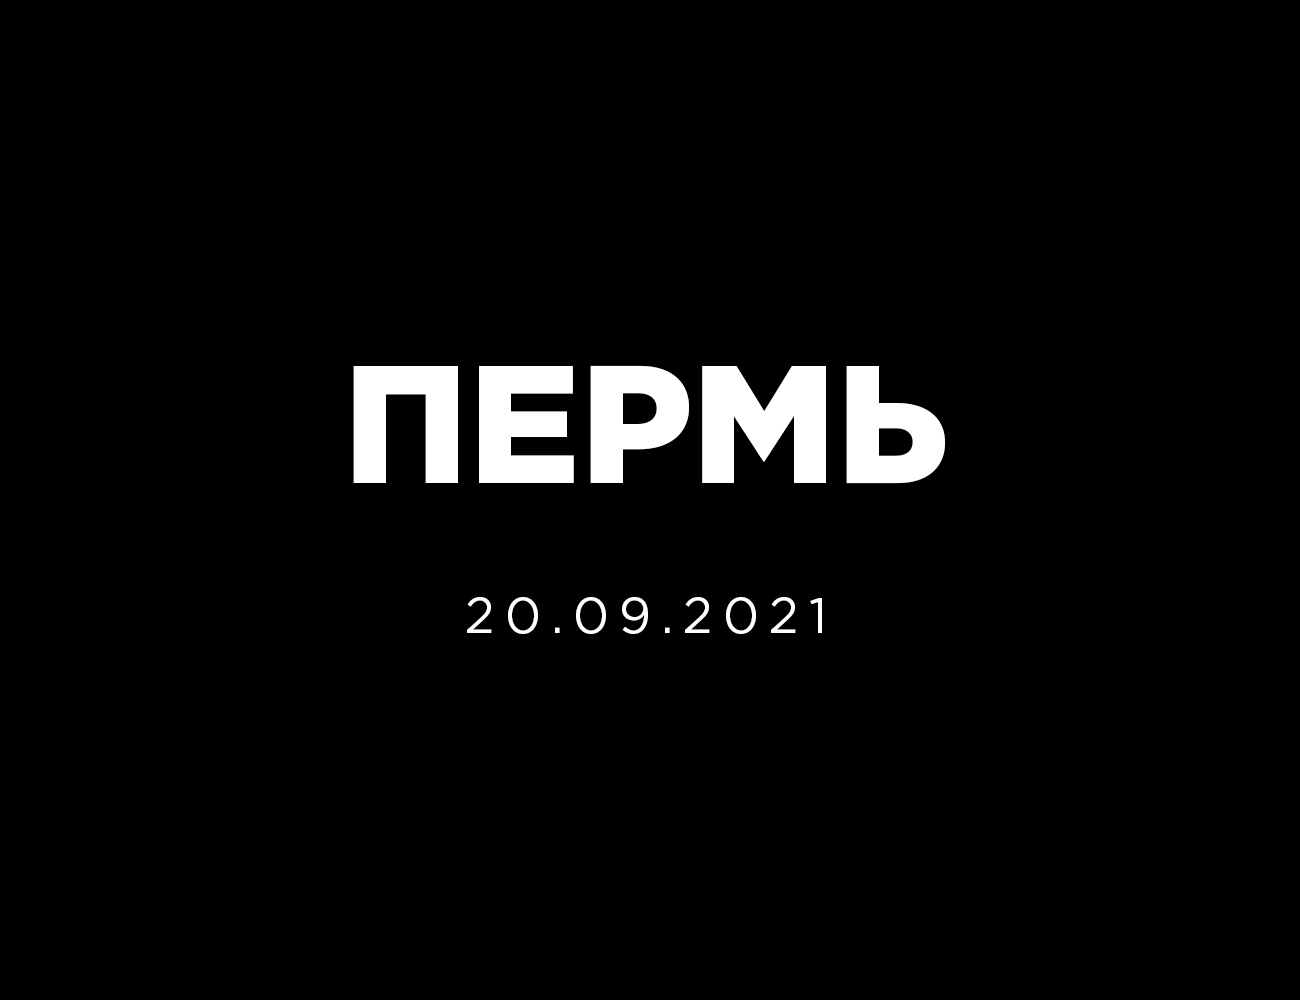 VTB United League expresses deep condolences over the tragedy at Perm State University